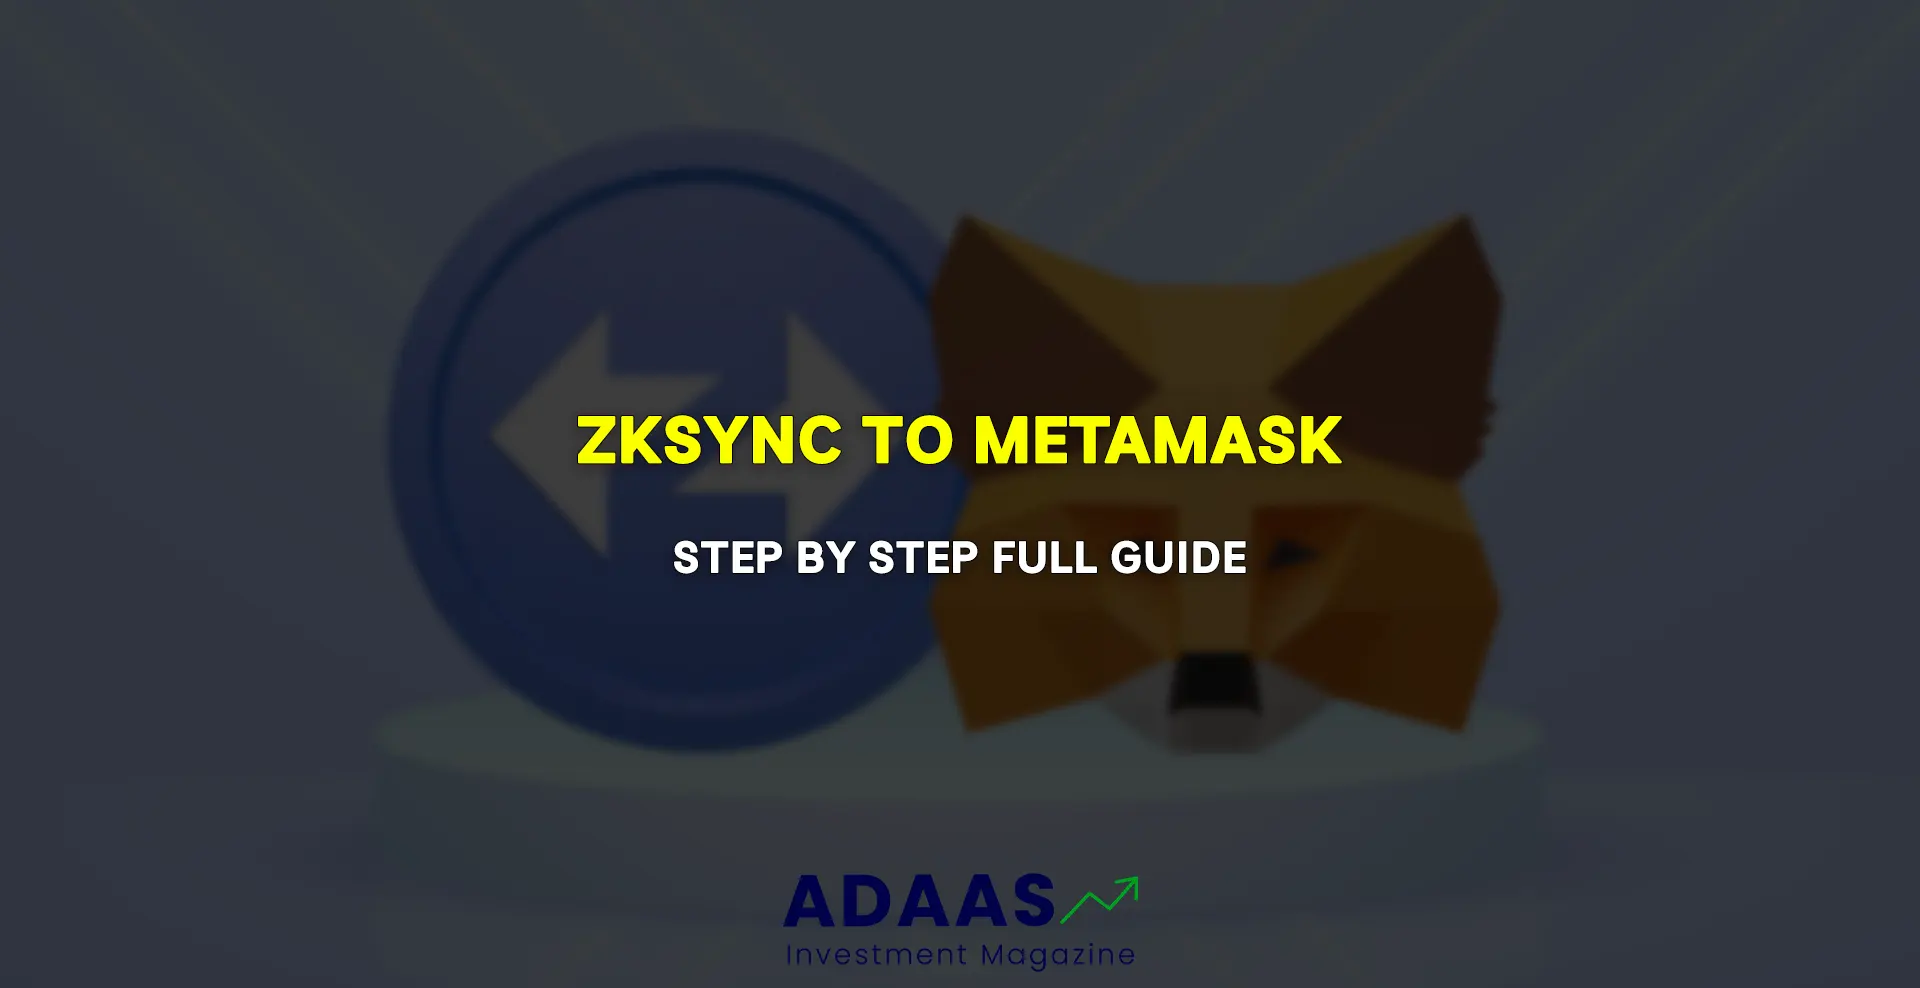 Linking Metamask with Bitcoin: Step-by-Step Guide